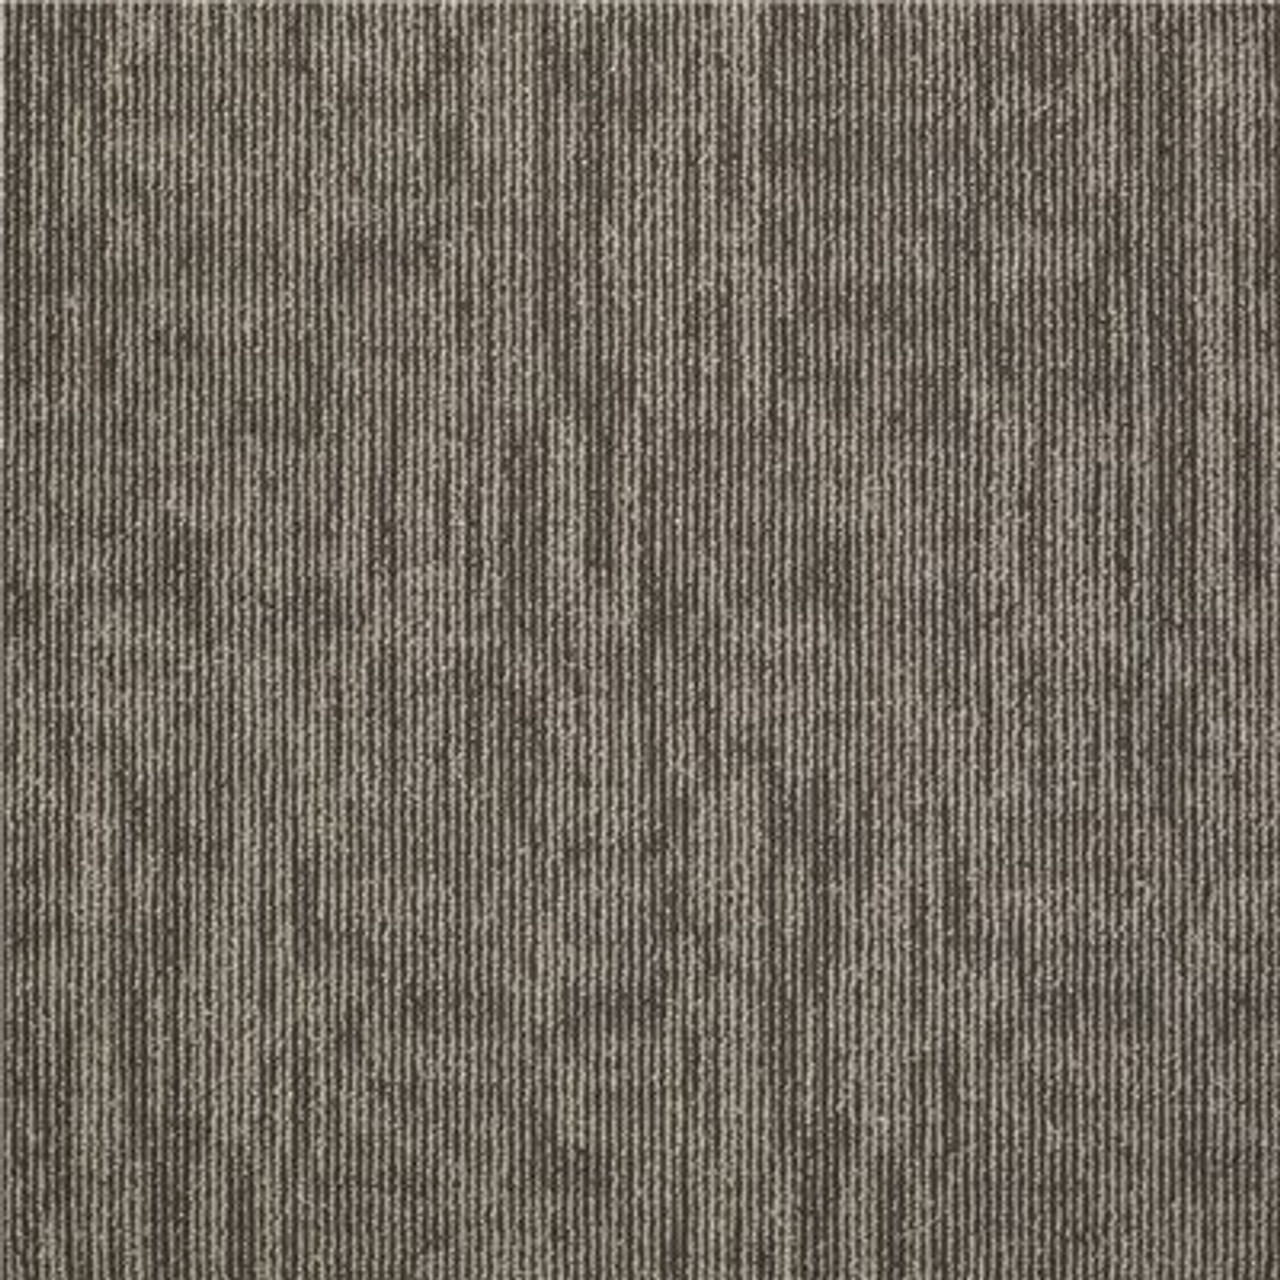 Shaw Graphix Maple Sugar Loop Commercial 24 In. X 24 In. Glue Down Carpet Tile (12-Tile/Case)